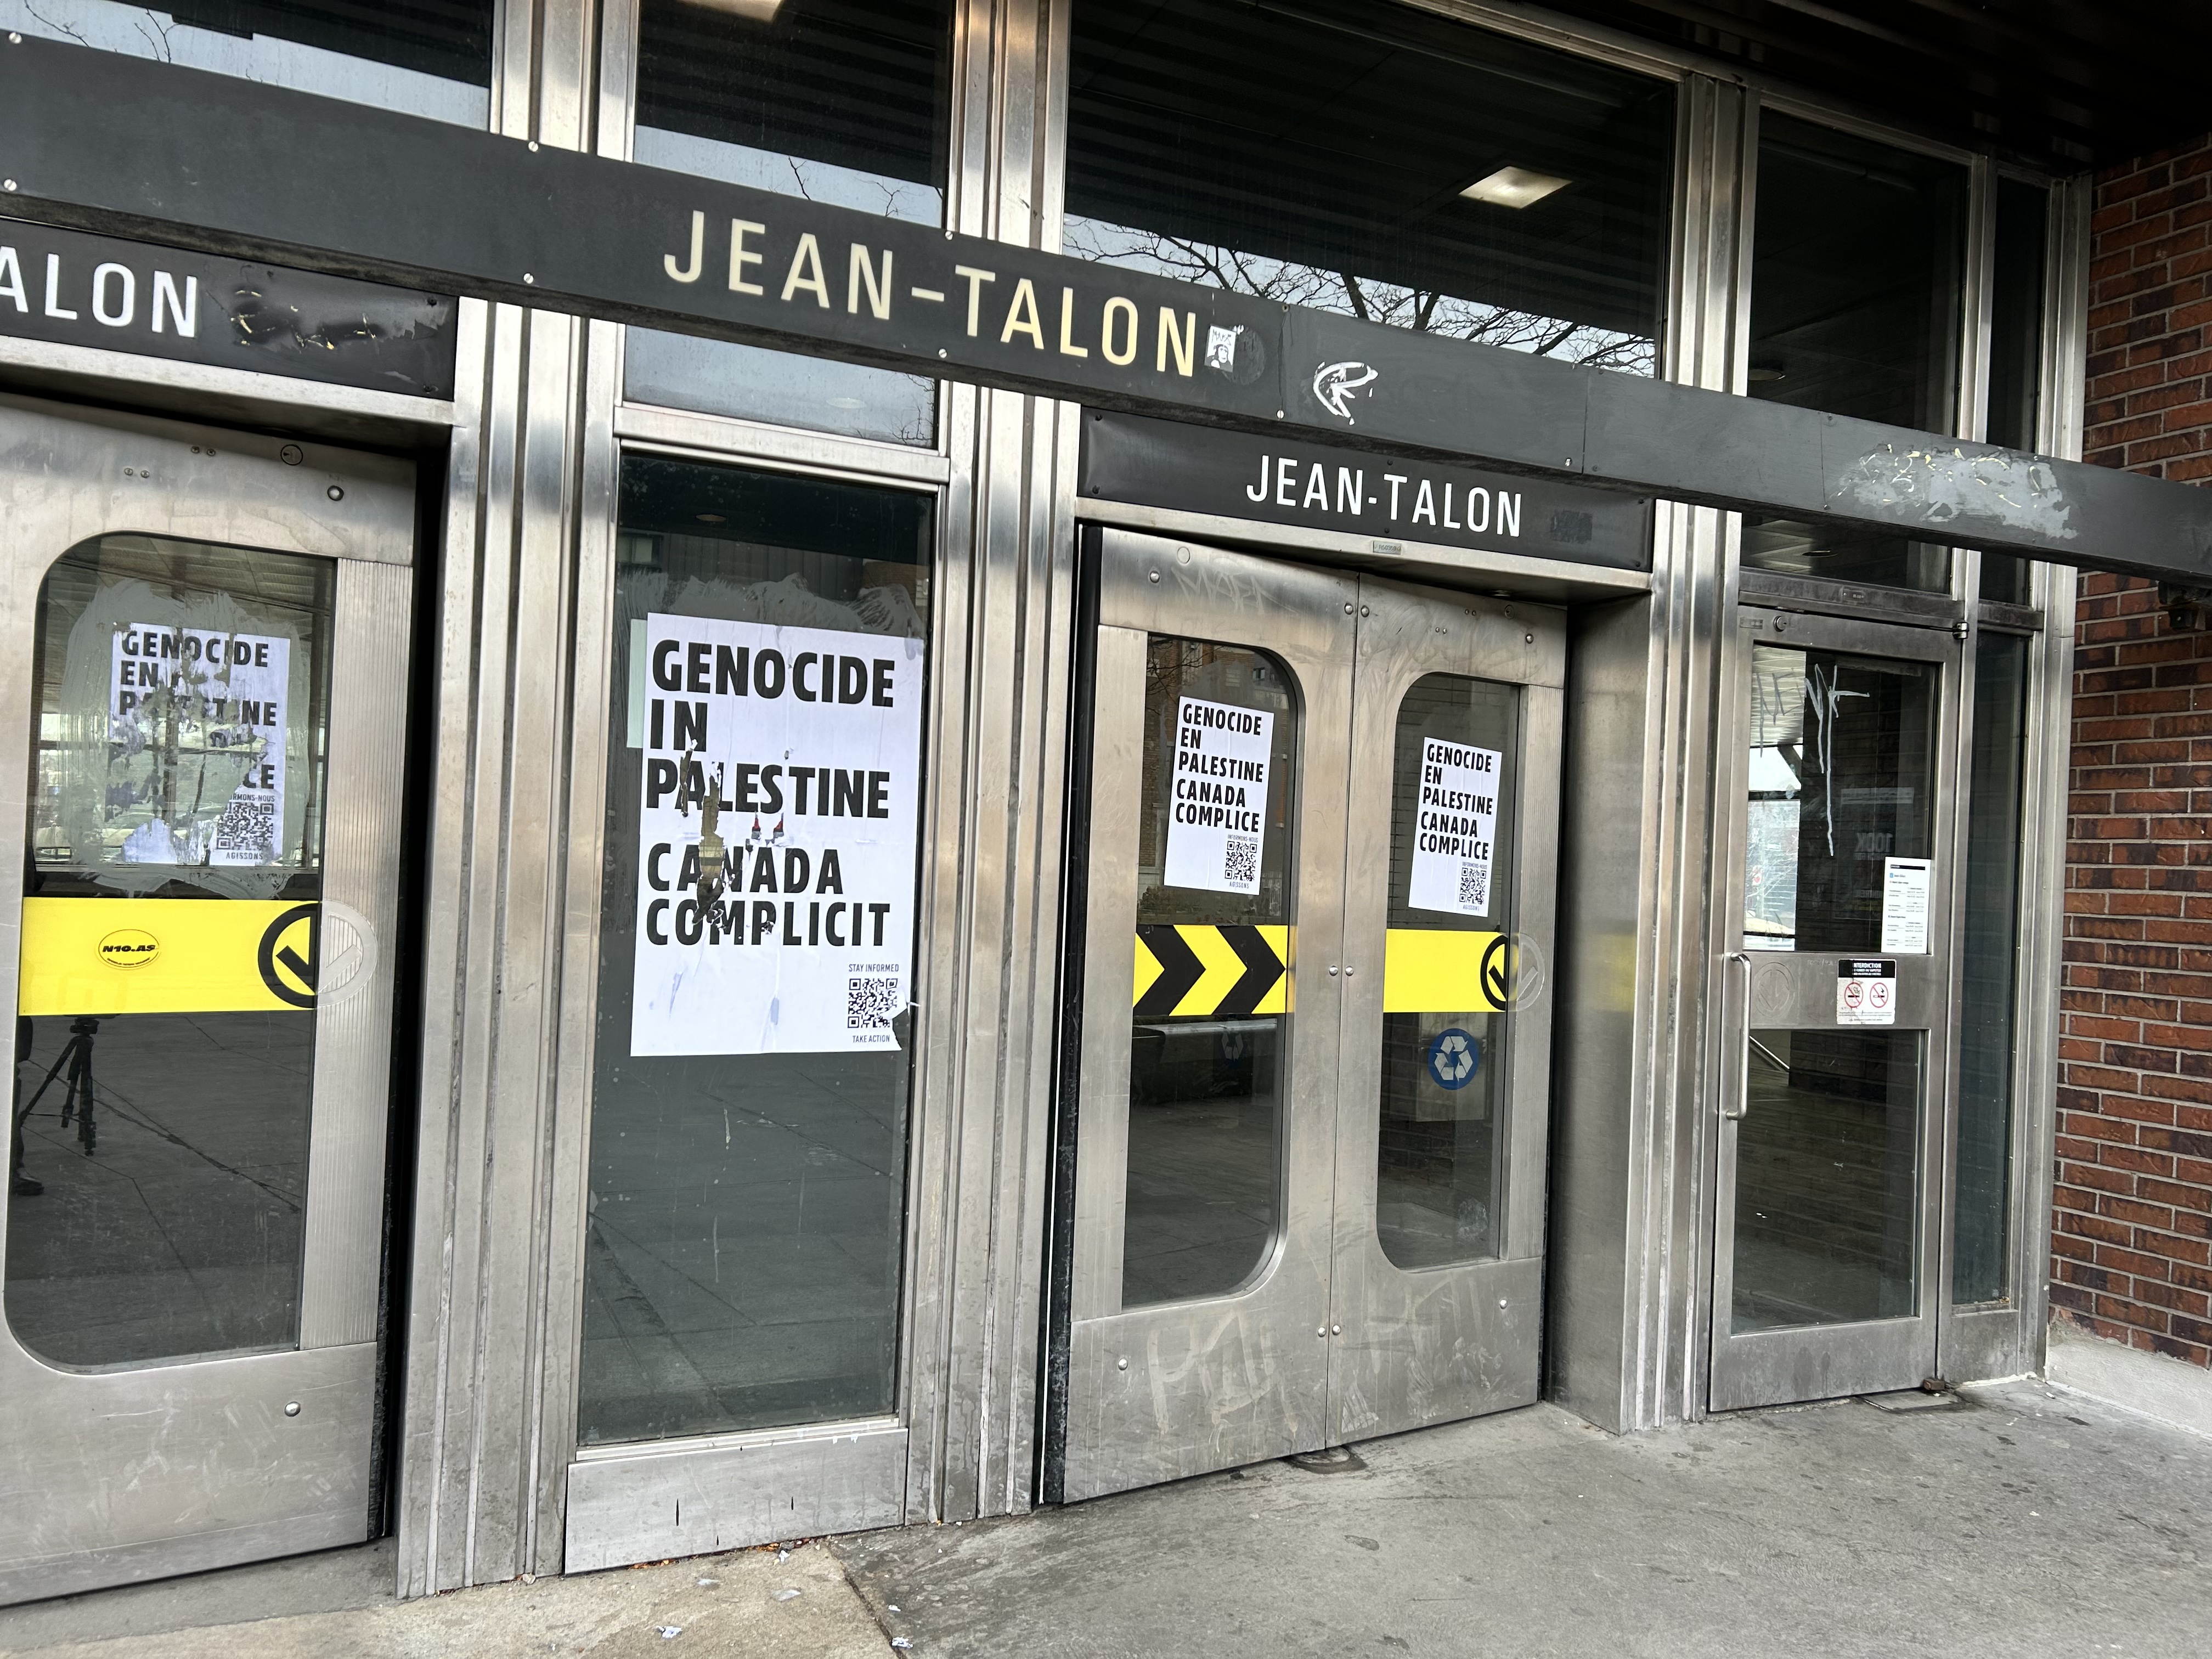 16 Metro stations in Montreal plastered with posters relating to Israel-Hamas conflict